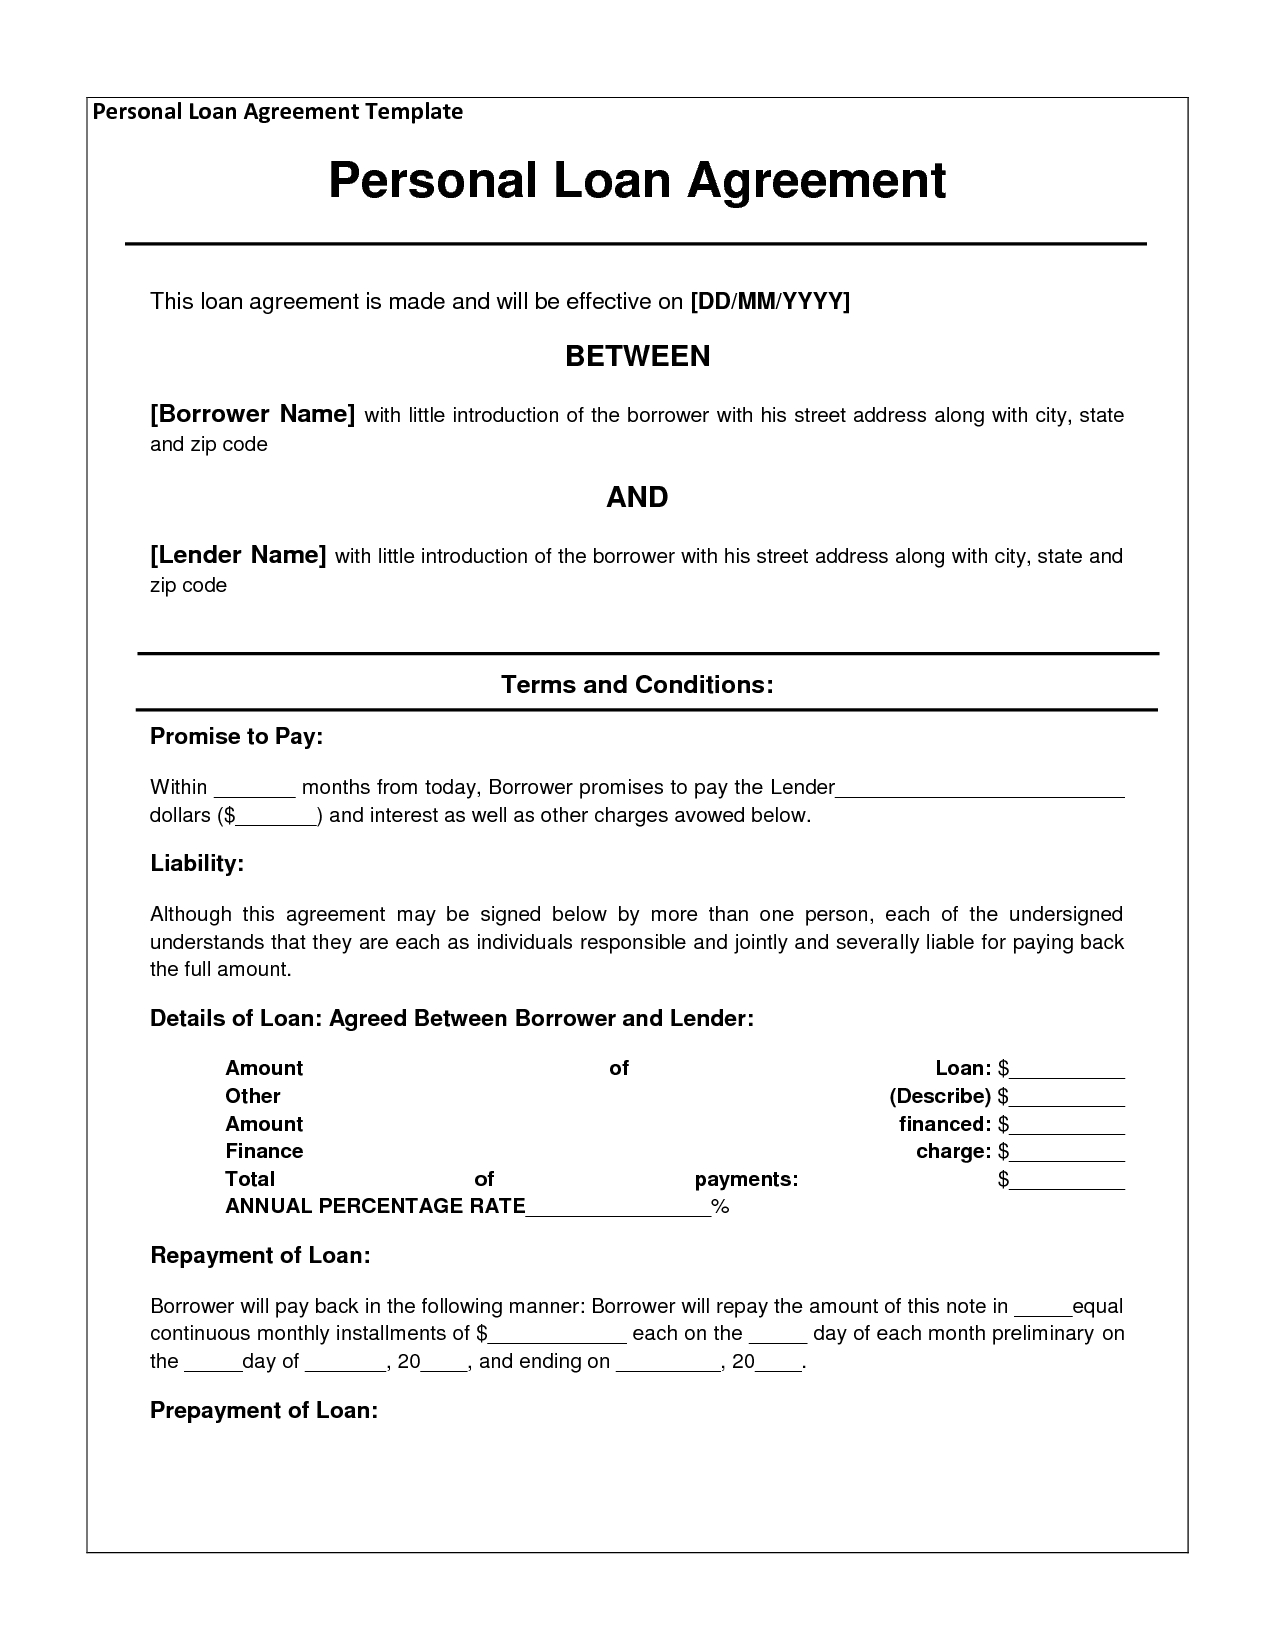 Free Personal Loan Agreement Form Template - $1000 Approved In 2 - Free Printable Loan Forms